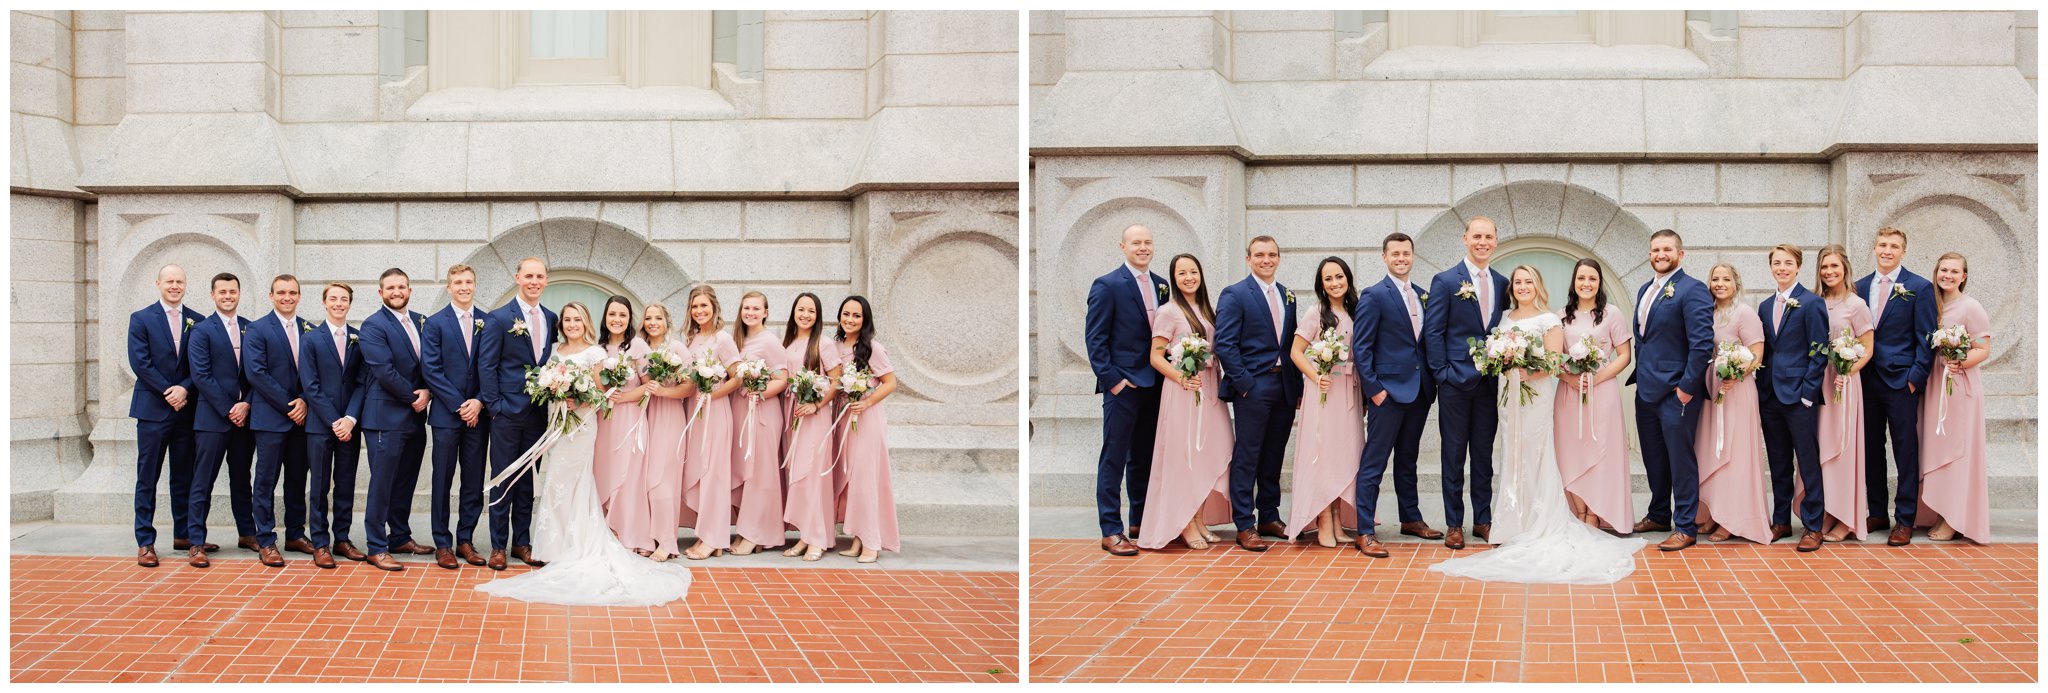 Wedding Party pictures at the SLC Temple